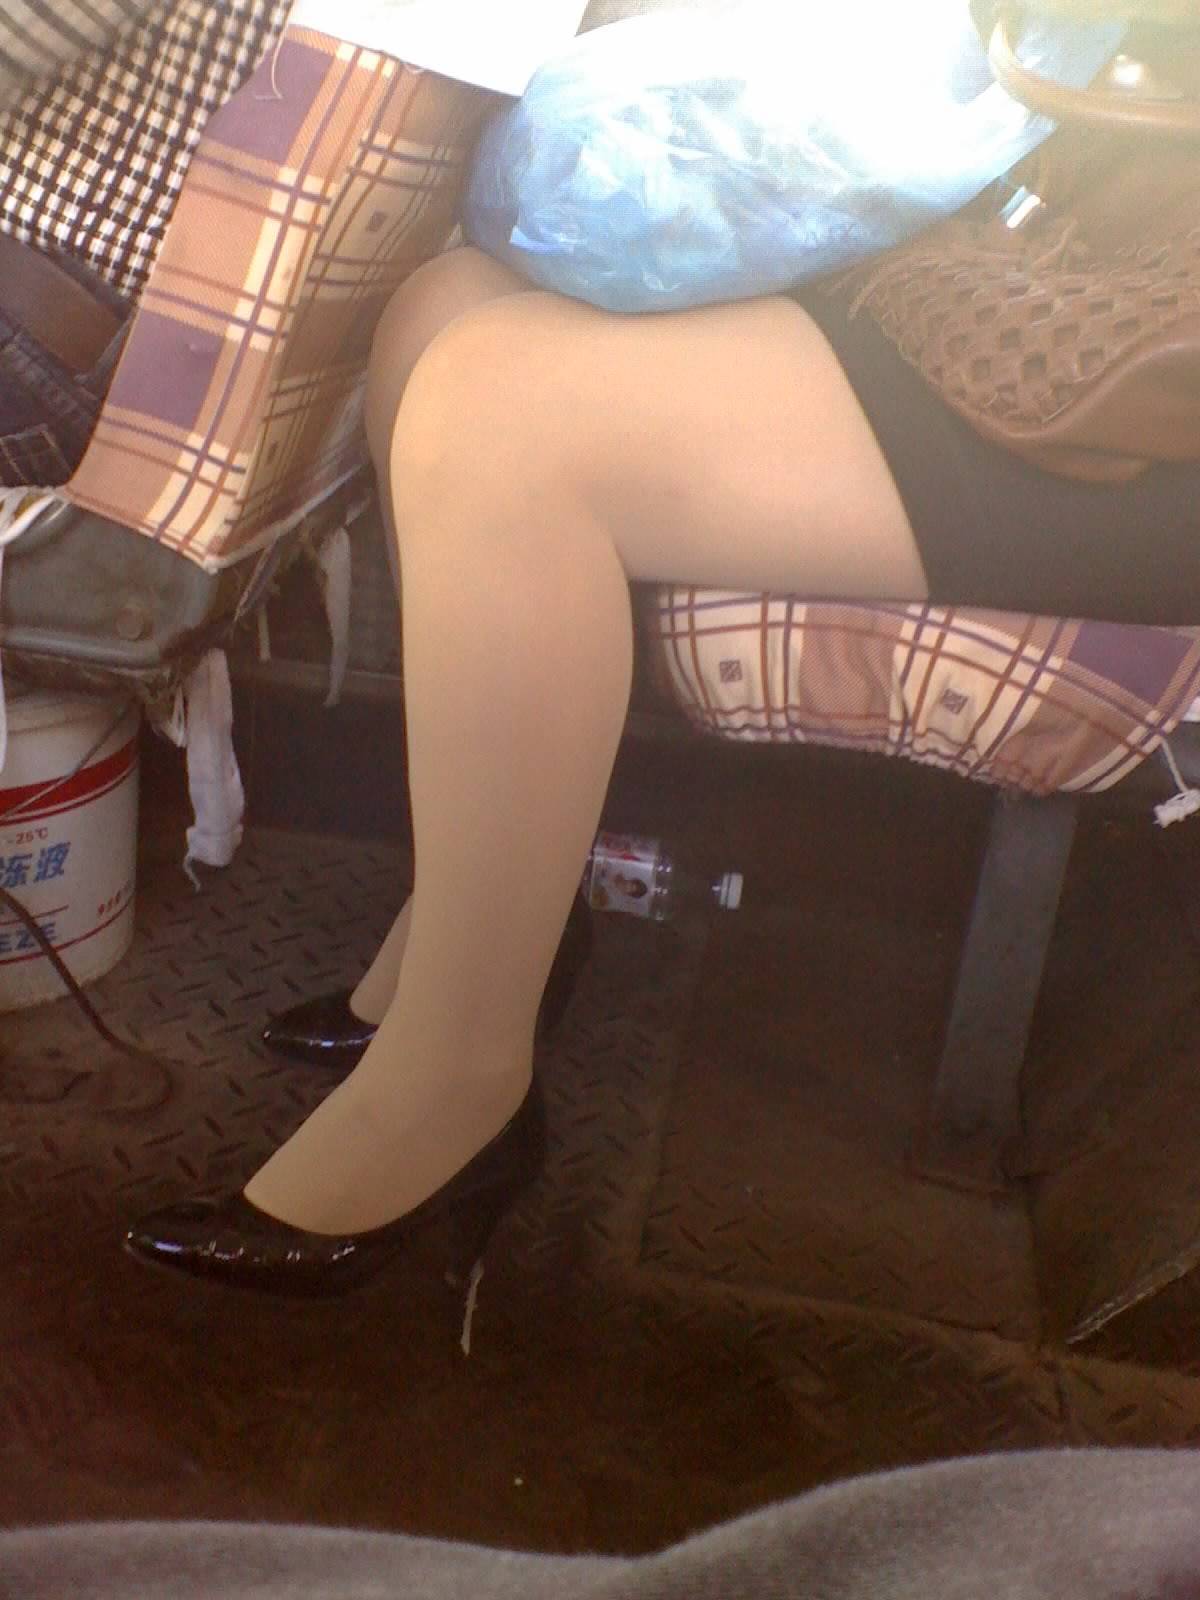 [outdoor Street Photo] on August 5, 2013, sneak photos of silk stockings, legs and black heels on the bus